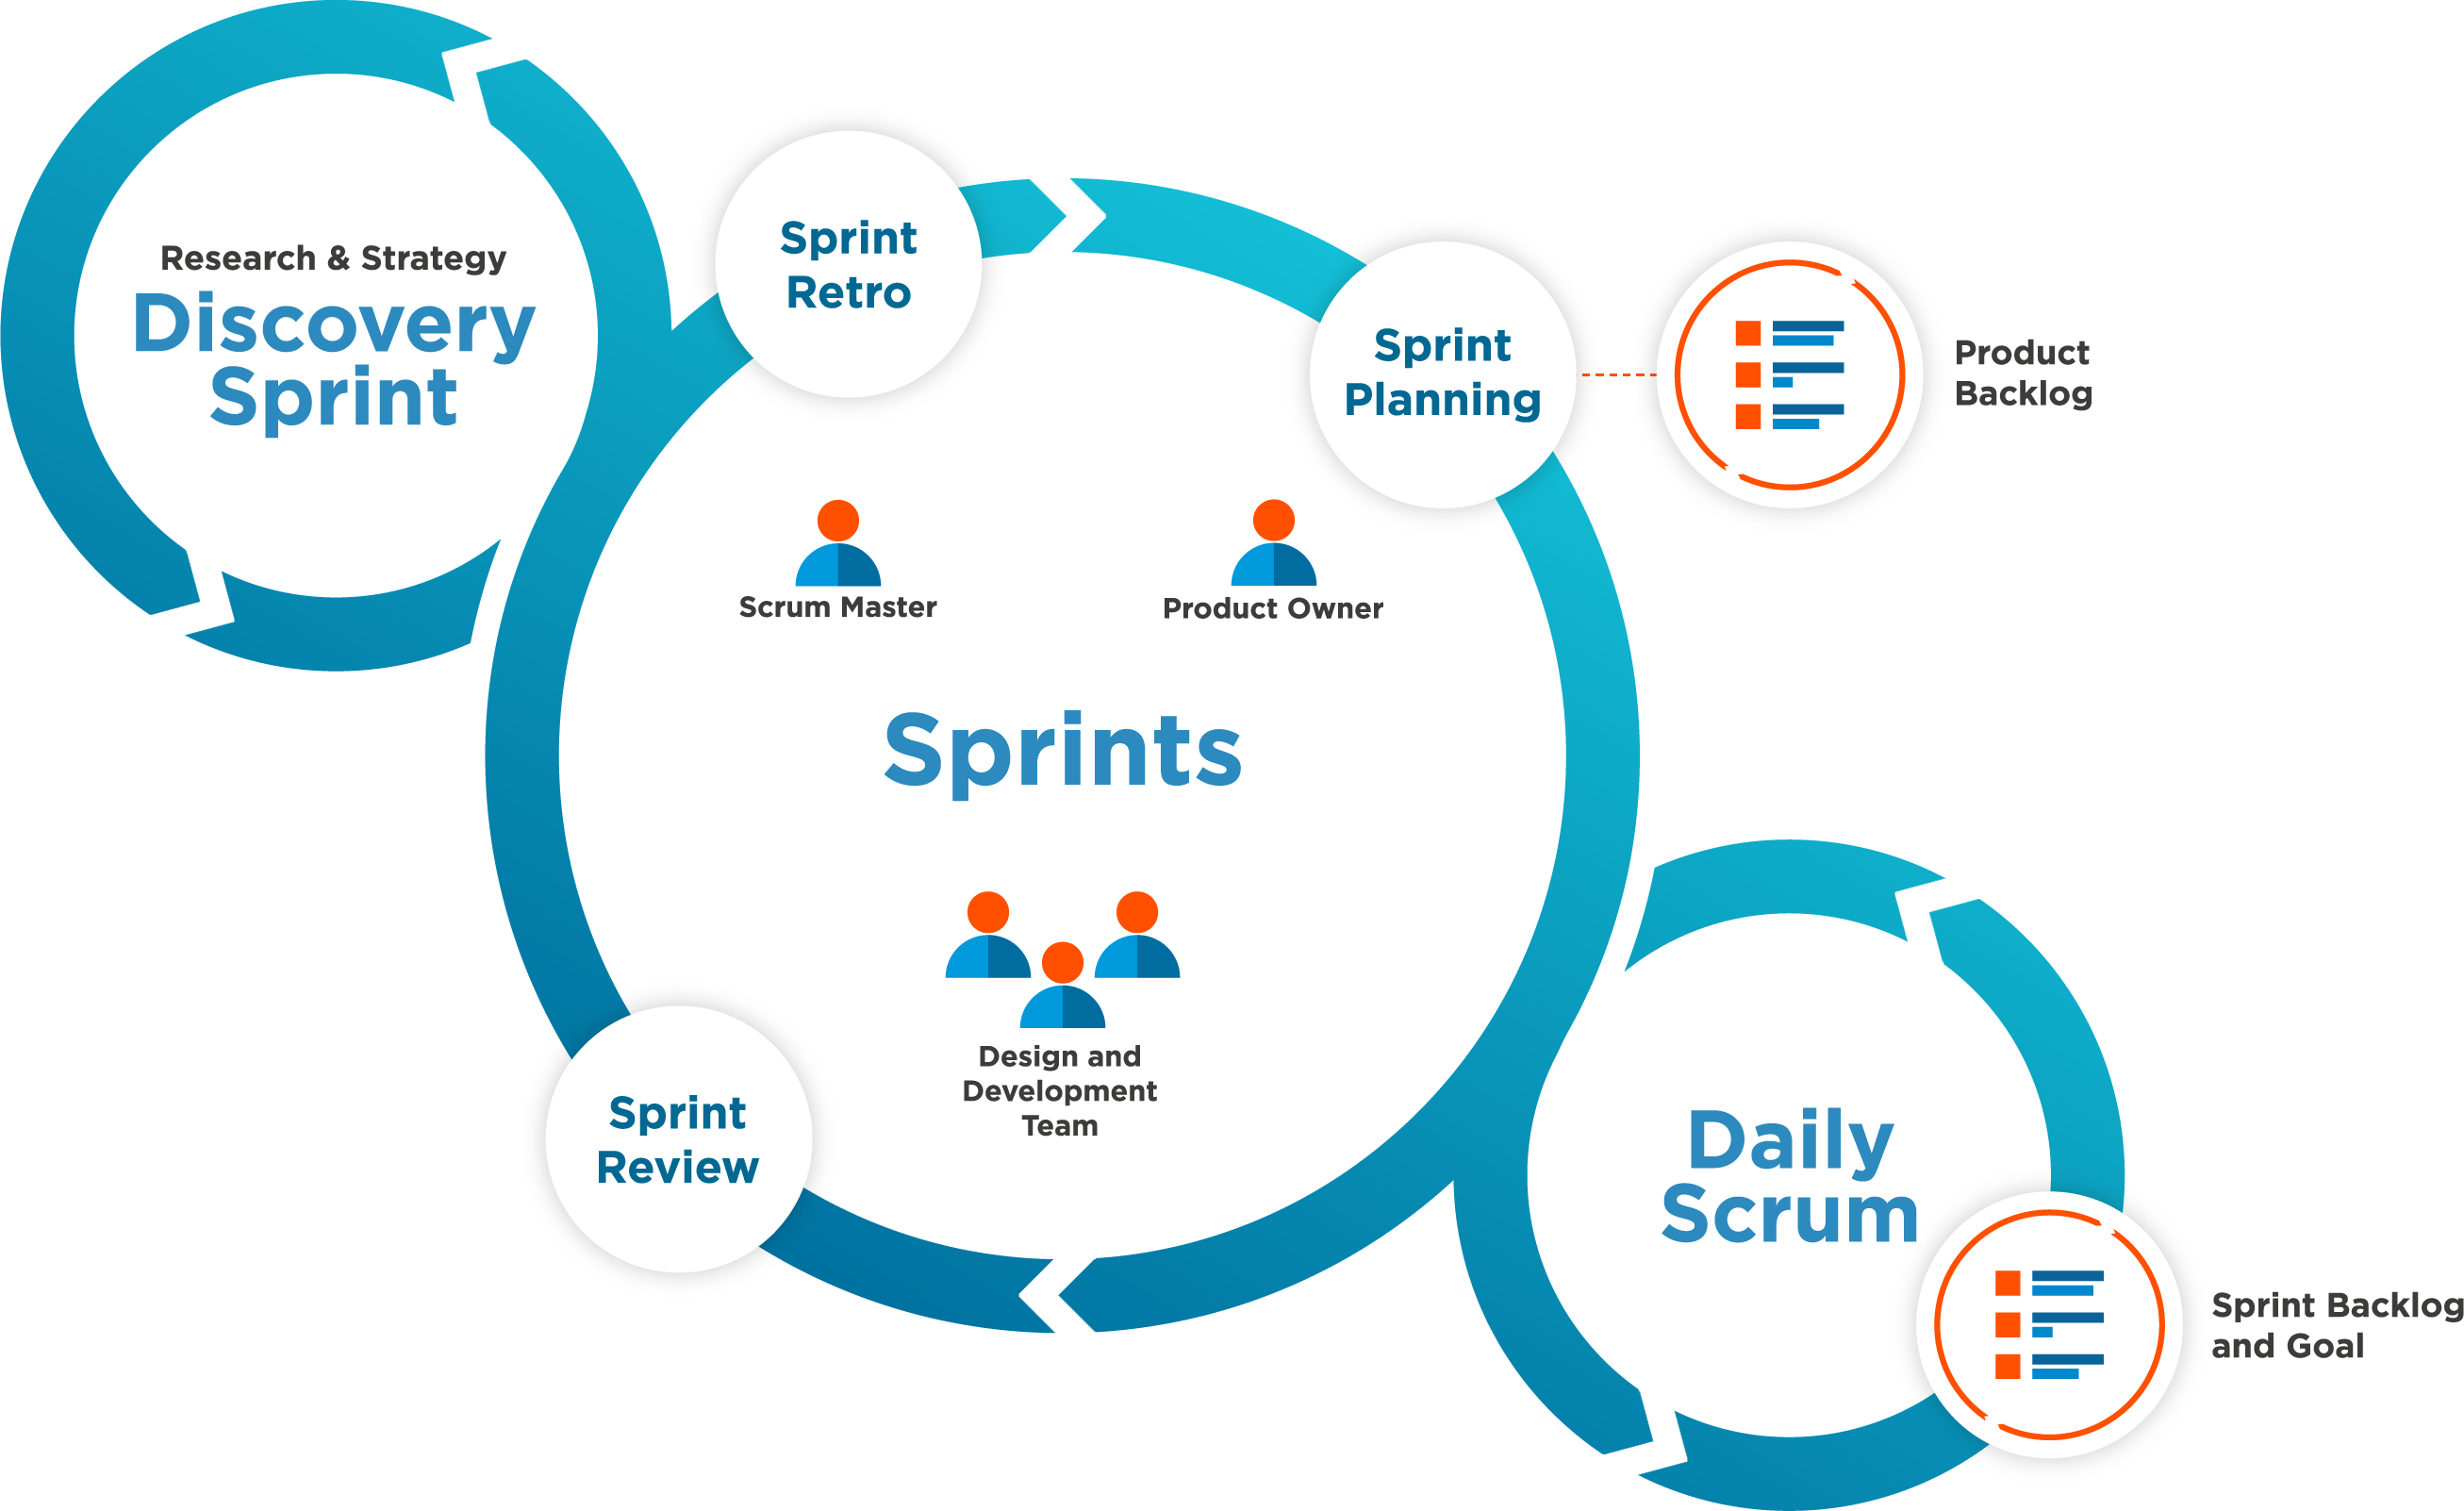 Diagram showing Agile working, from discovery sprint through sprint planning, review and retro, and daily scrum.